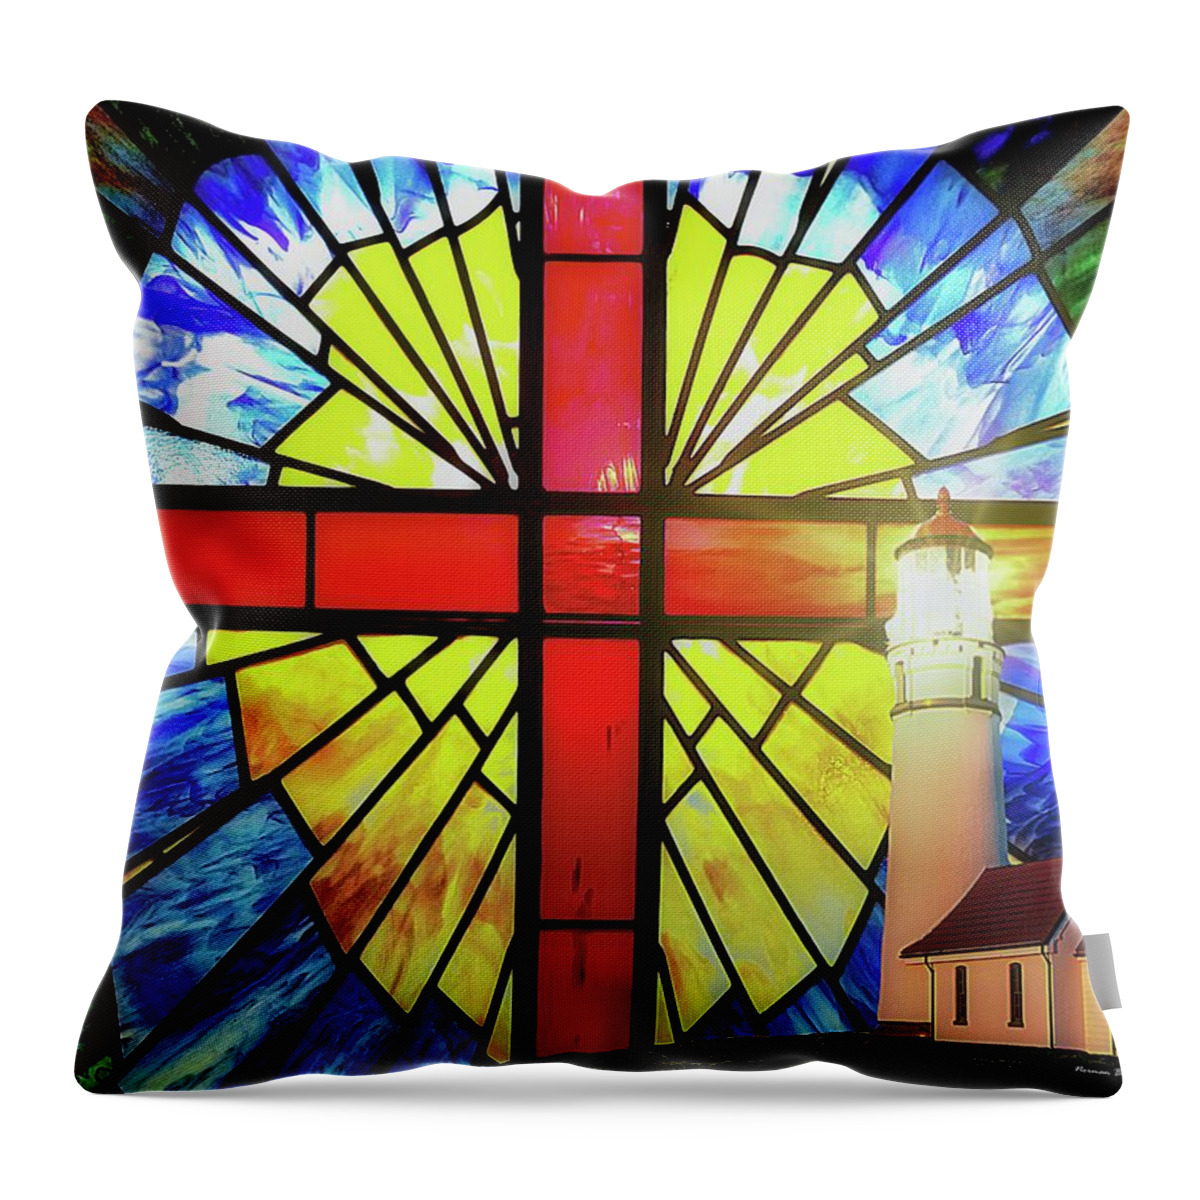 Lighthouse Throw Pillow featuring the digital art Through the Darkness by Norman Brule